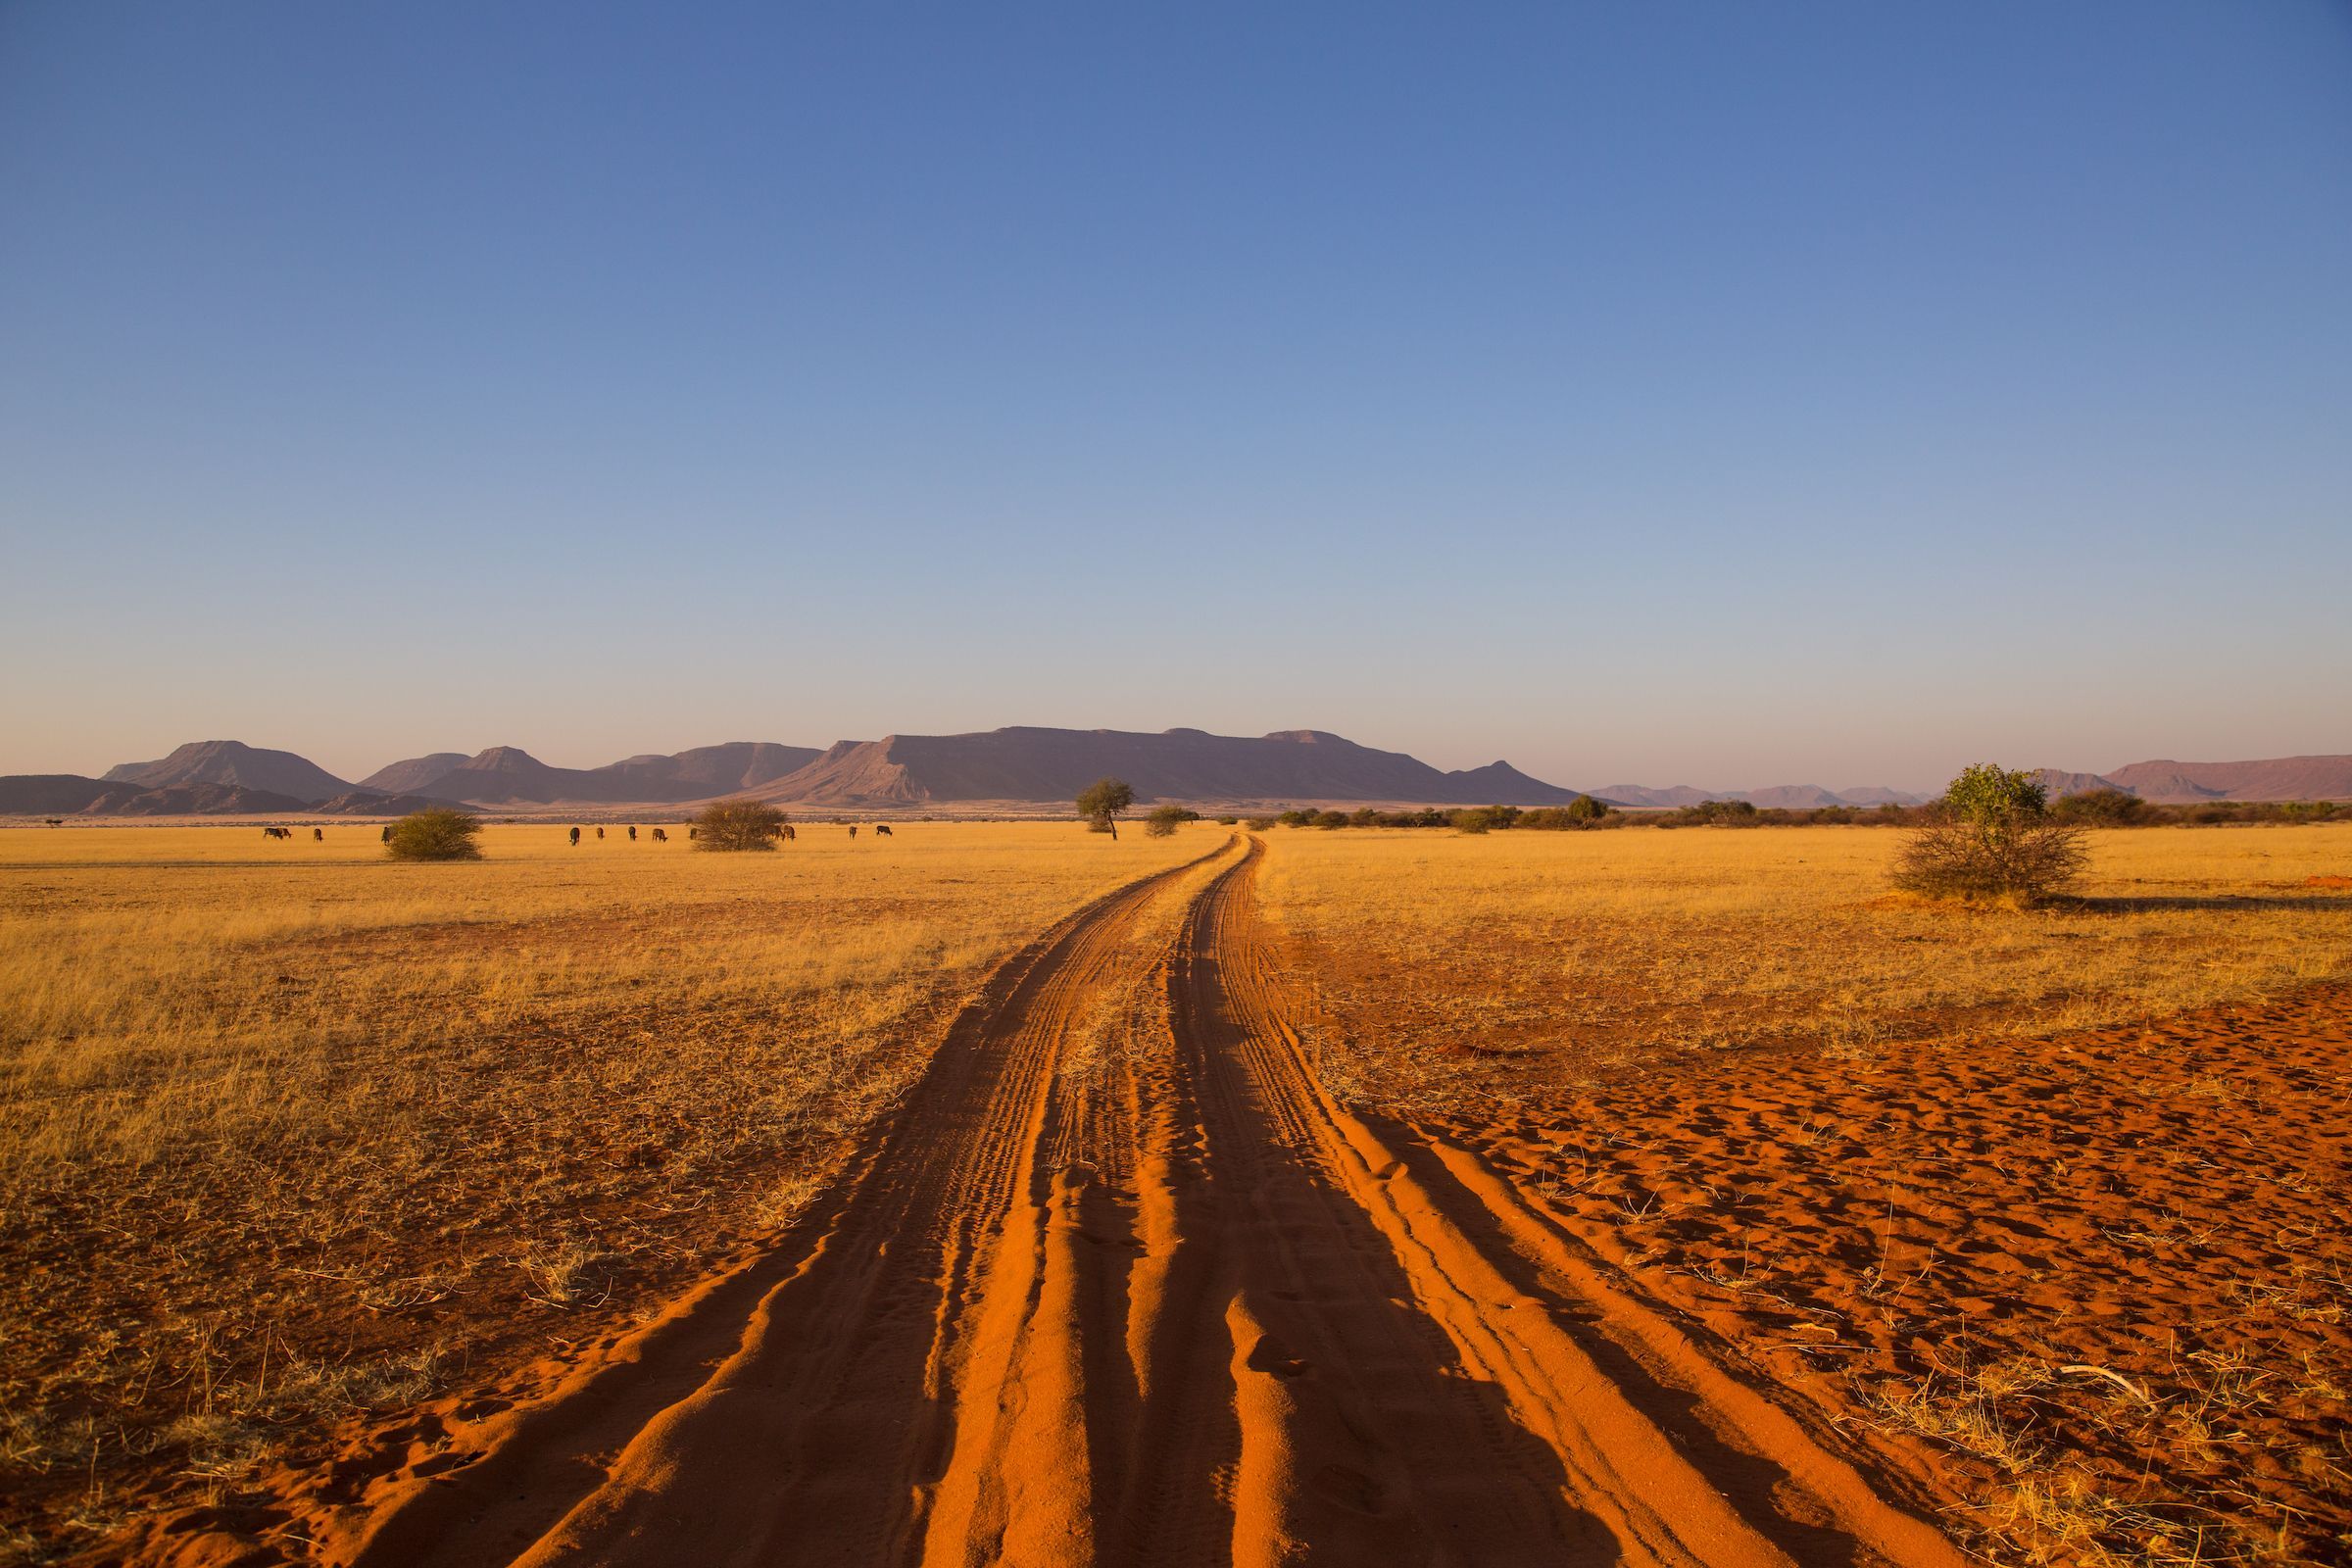 The Road to Nowhere in remote Kaokoland on our Namibia photography tour